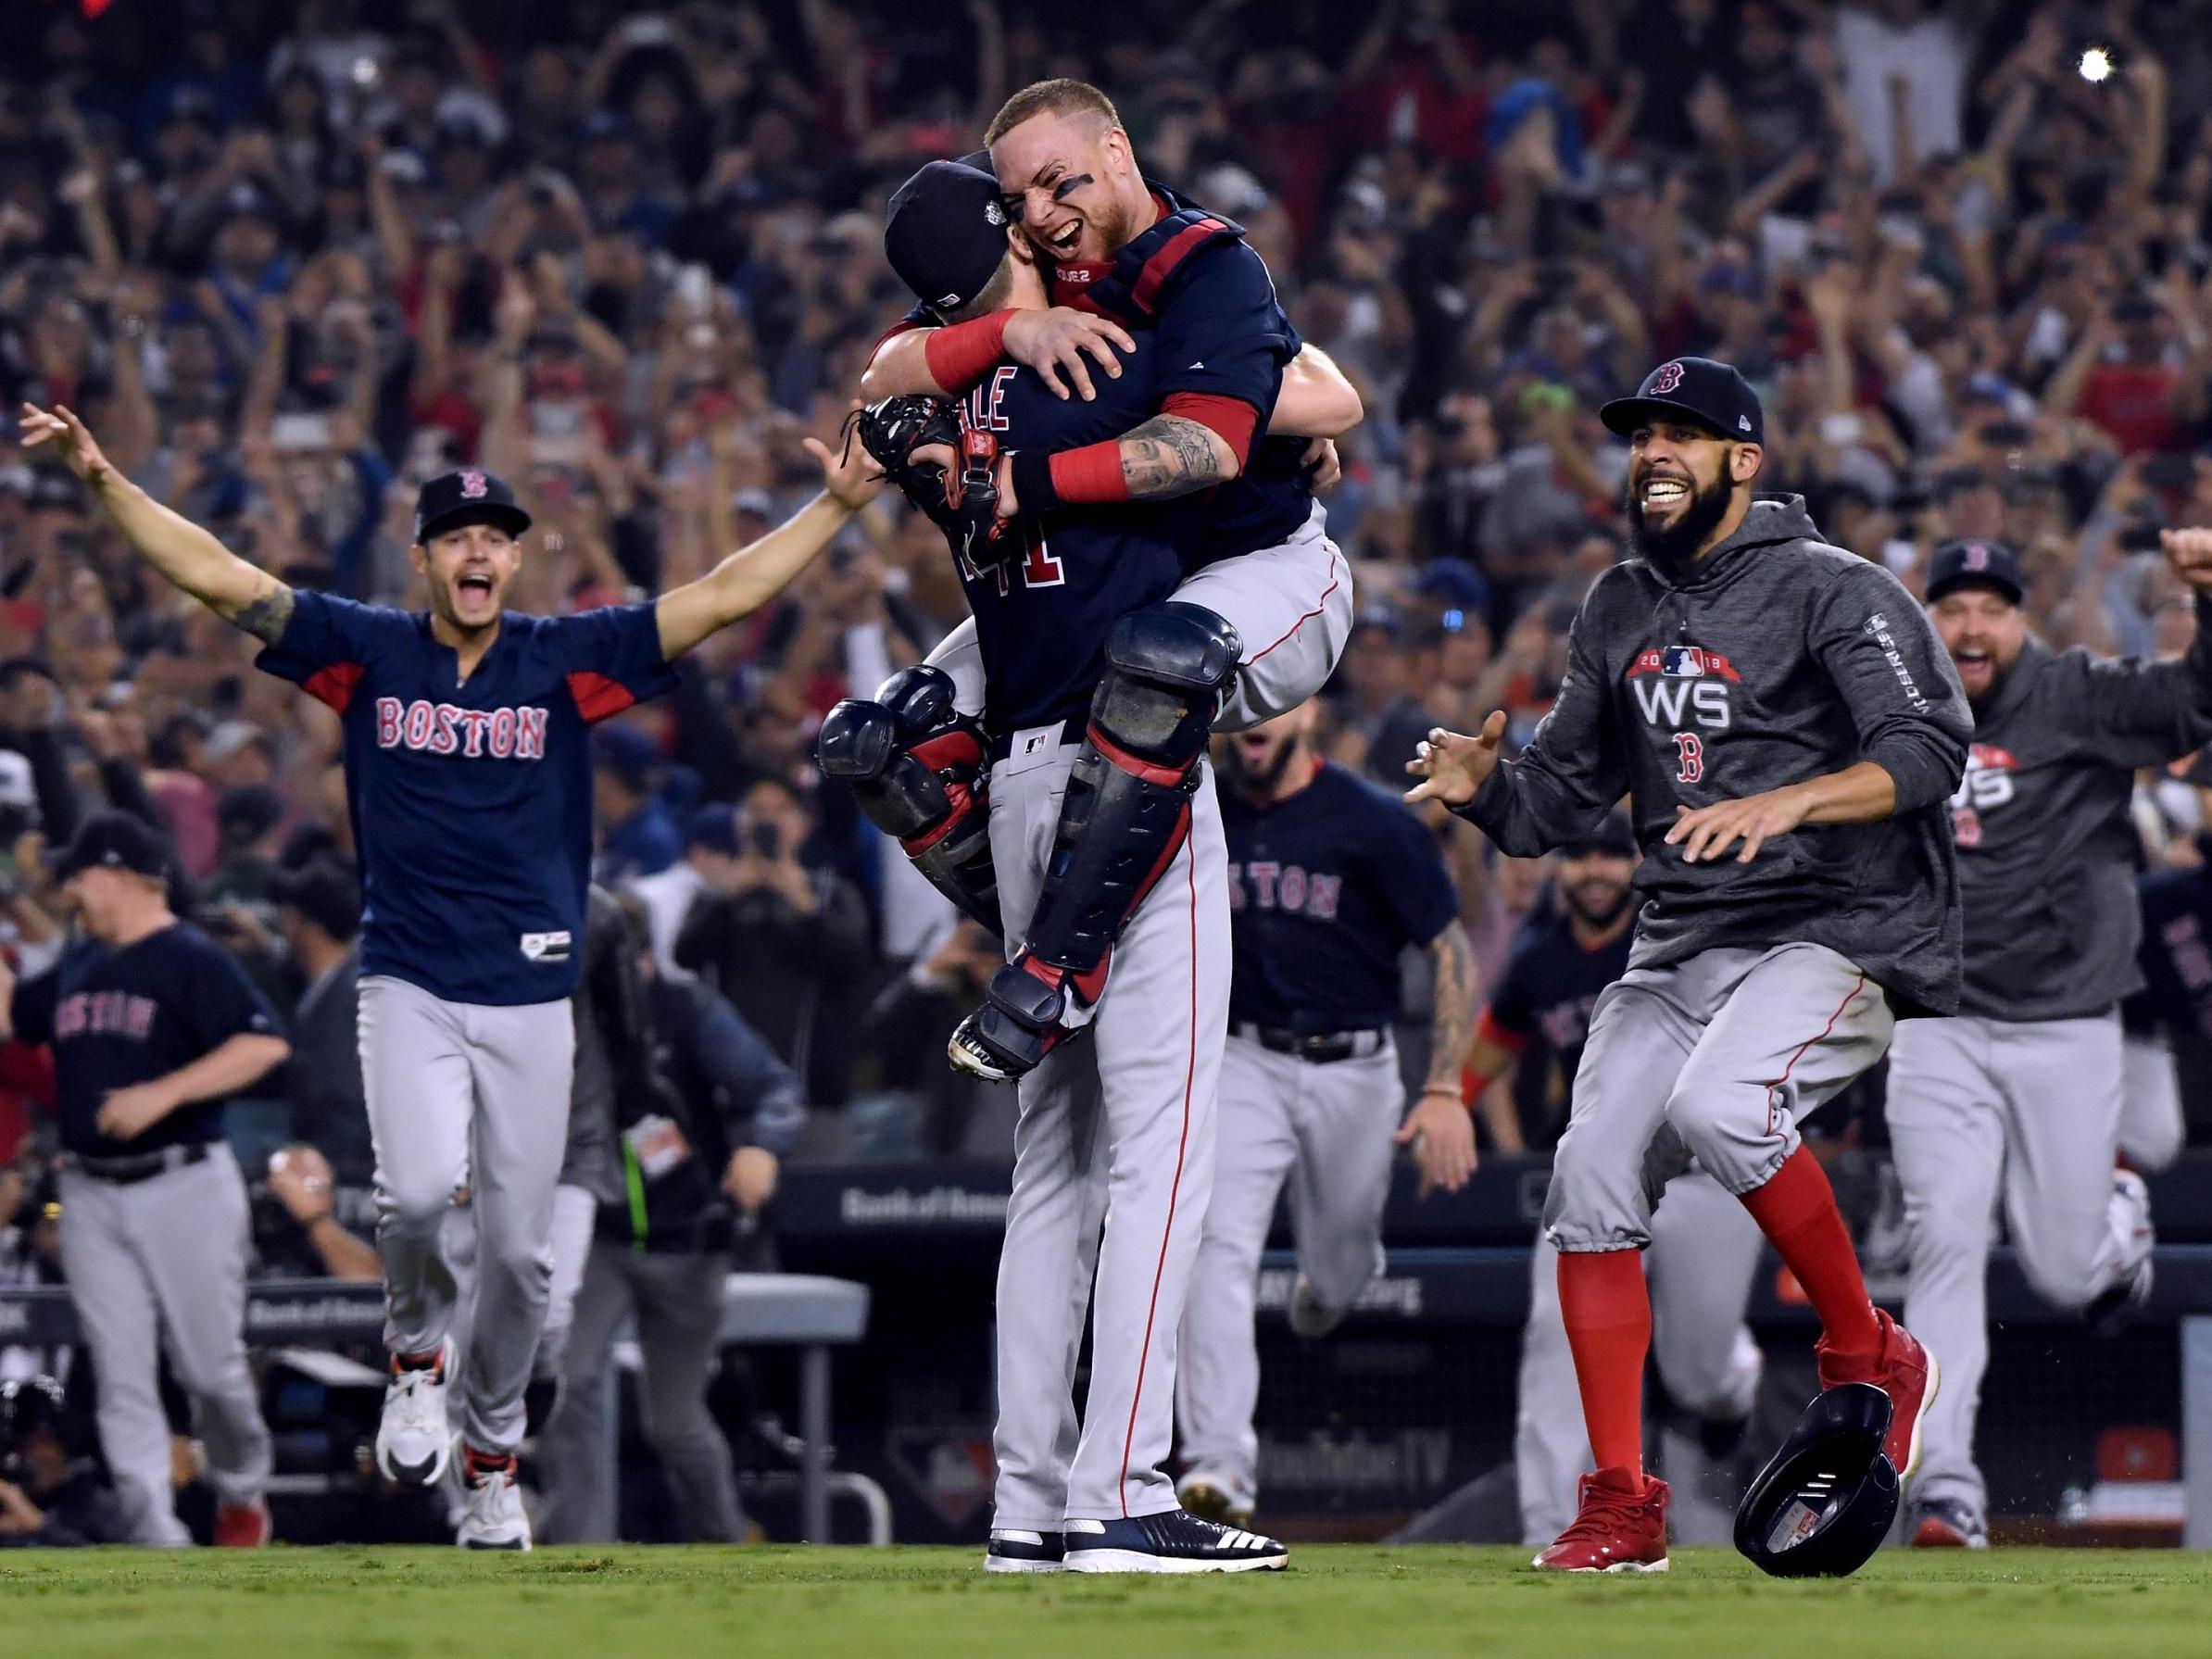 The Boston Red Sox celebrating a win